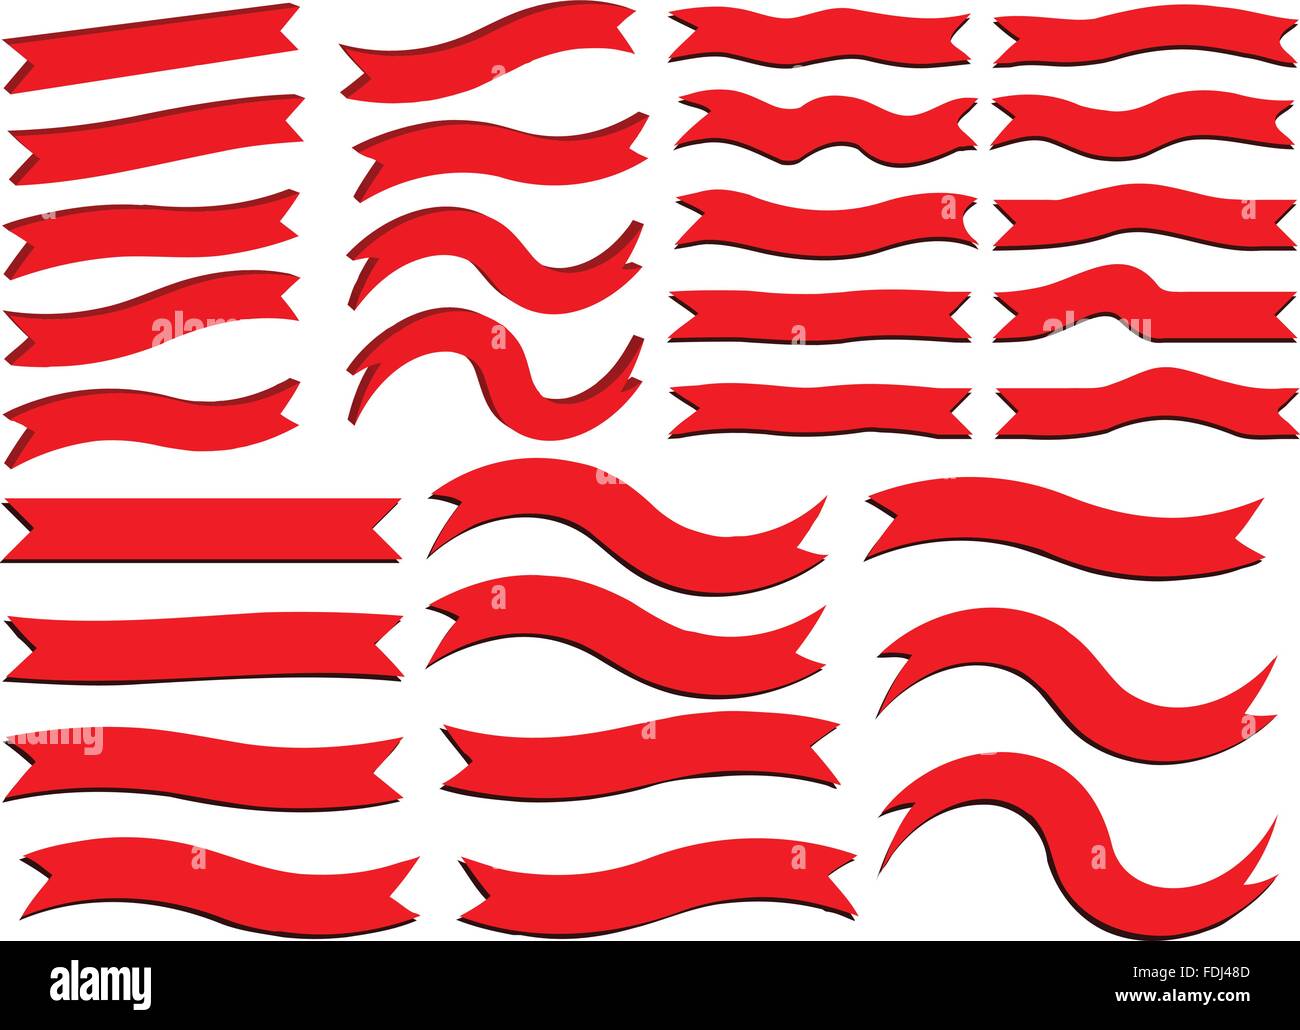 Twisted, Wavy and Flag Ribbon Banners Vector Collection/Set Stock Vector